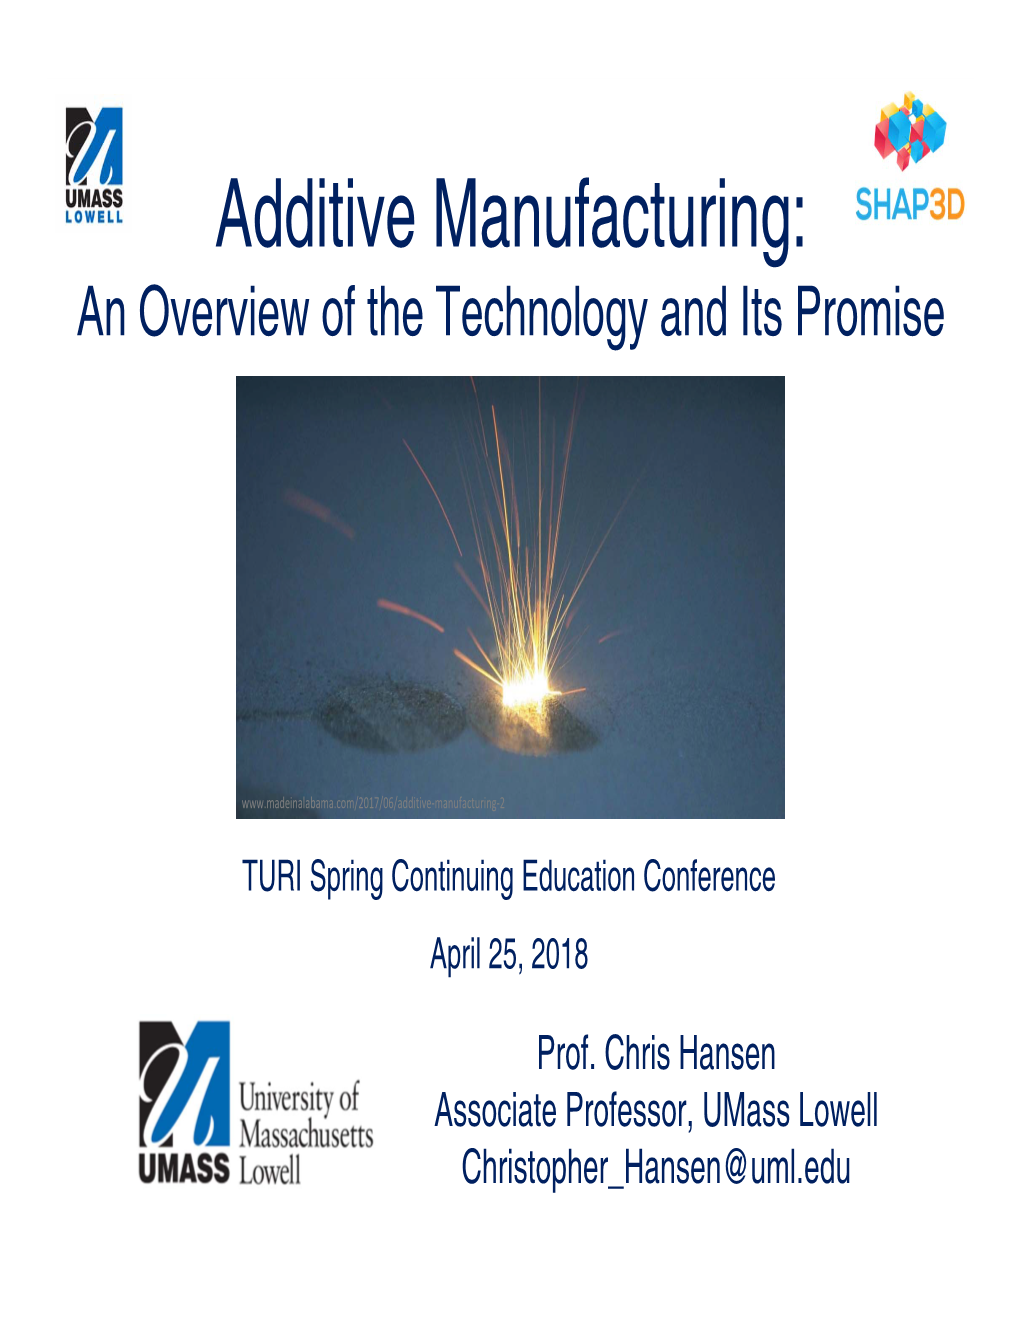 Additive Manufacturing: an Overview of the Technology and Its Promise